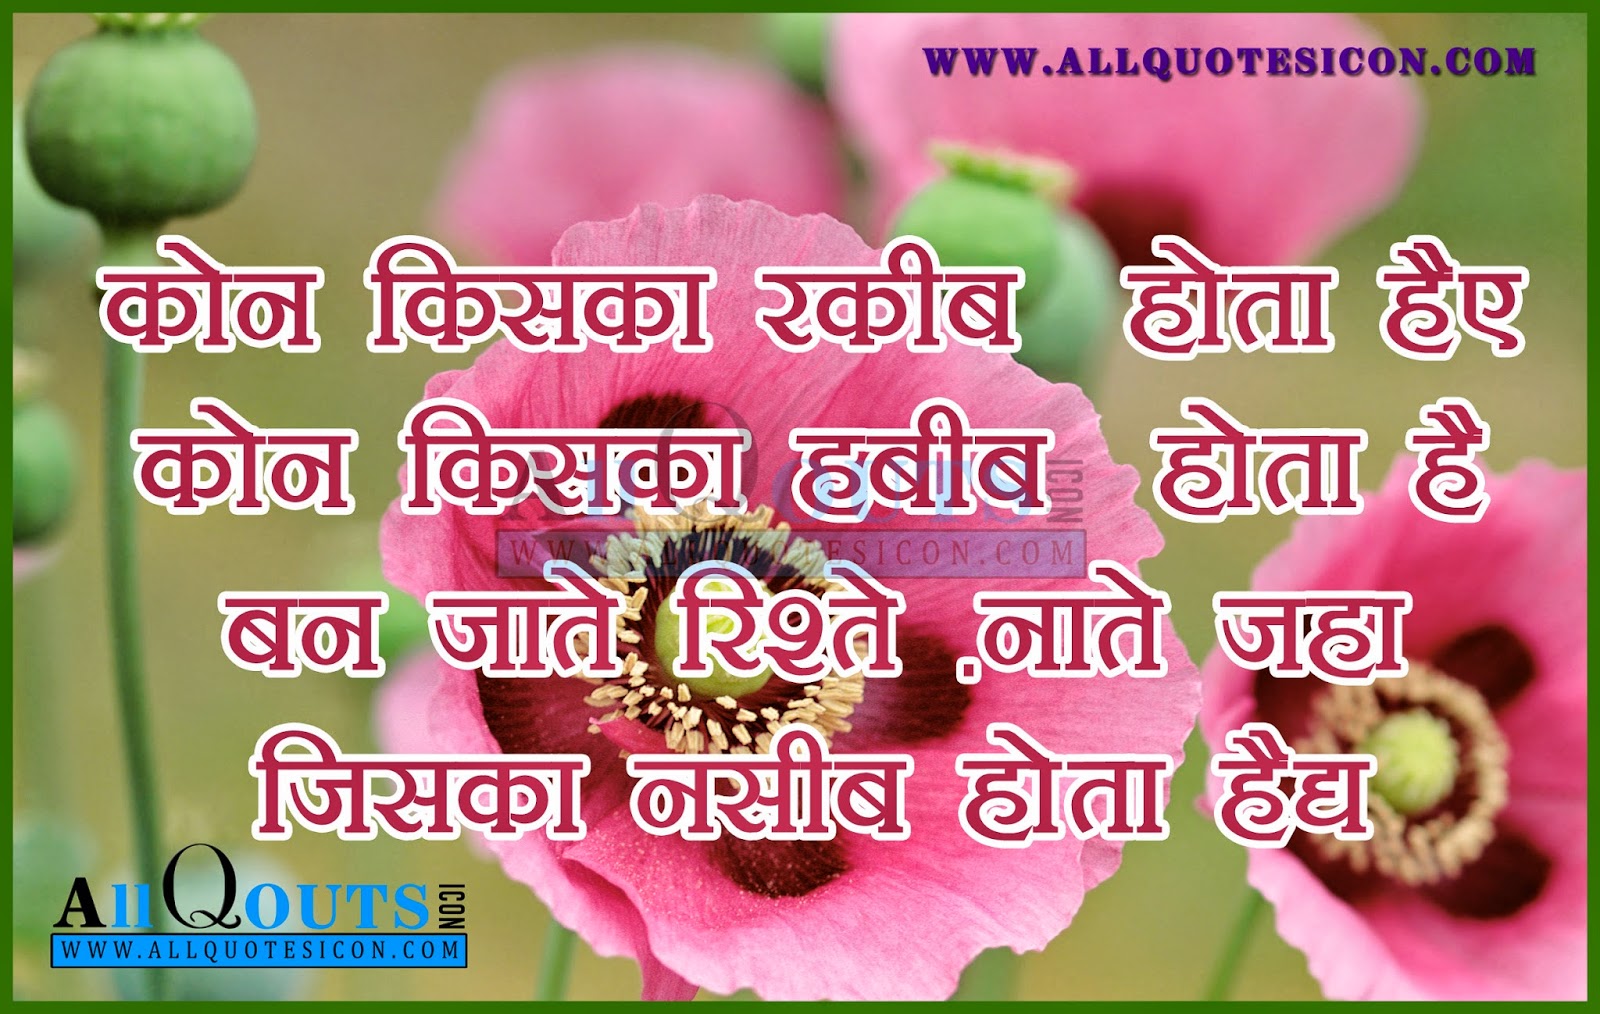 Hindi quotes images thoughts inspiration motivation sayings friendship